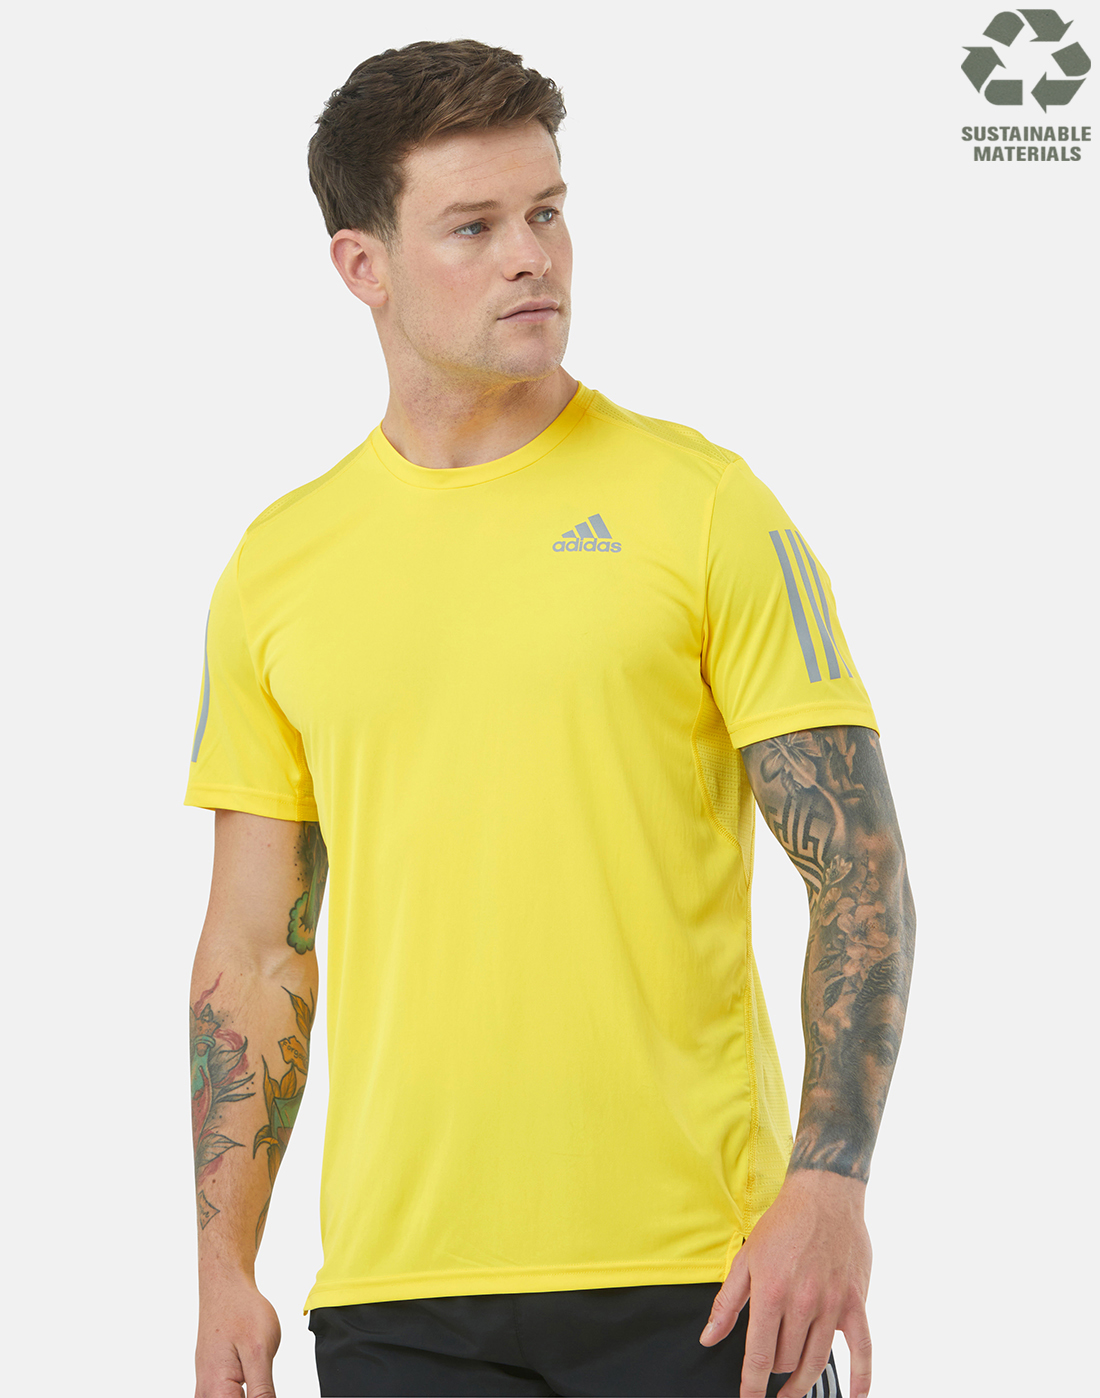 adidas Mens Own The Run T-Shirt - Yellow | Life Style Sports IE